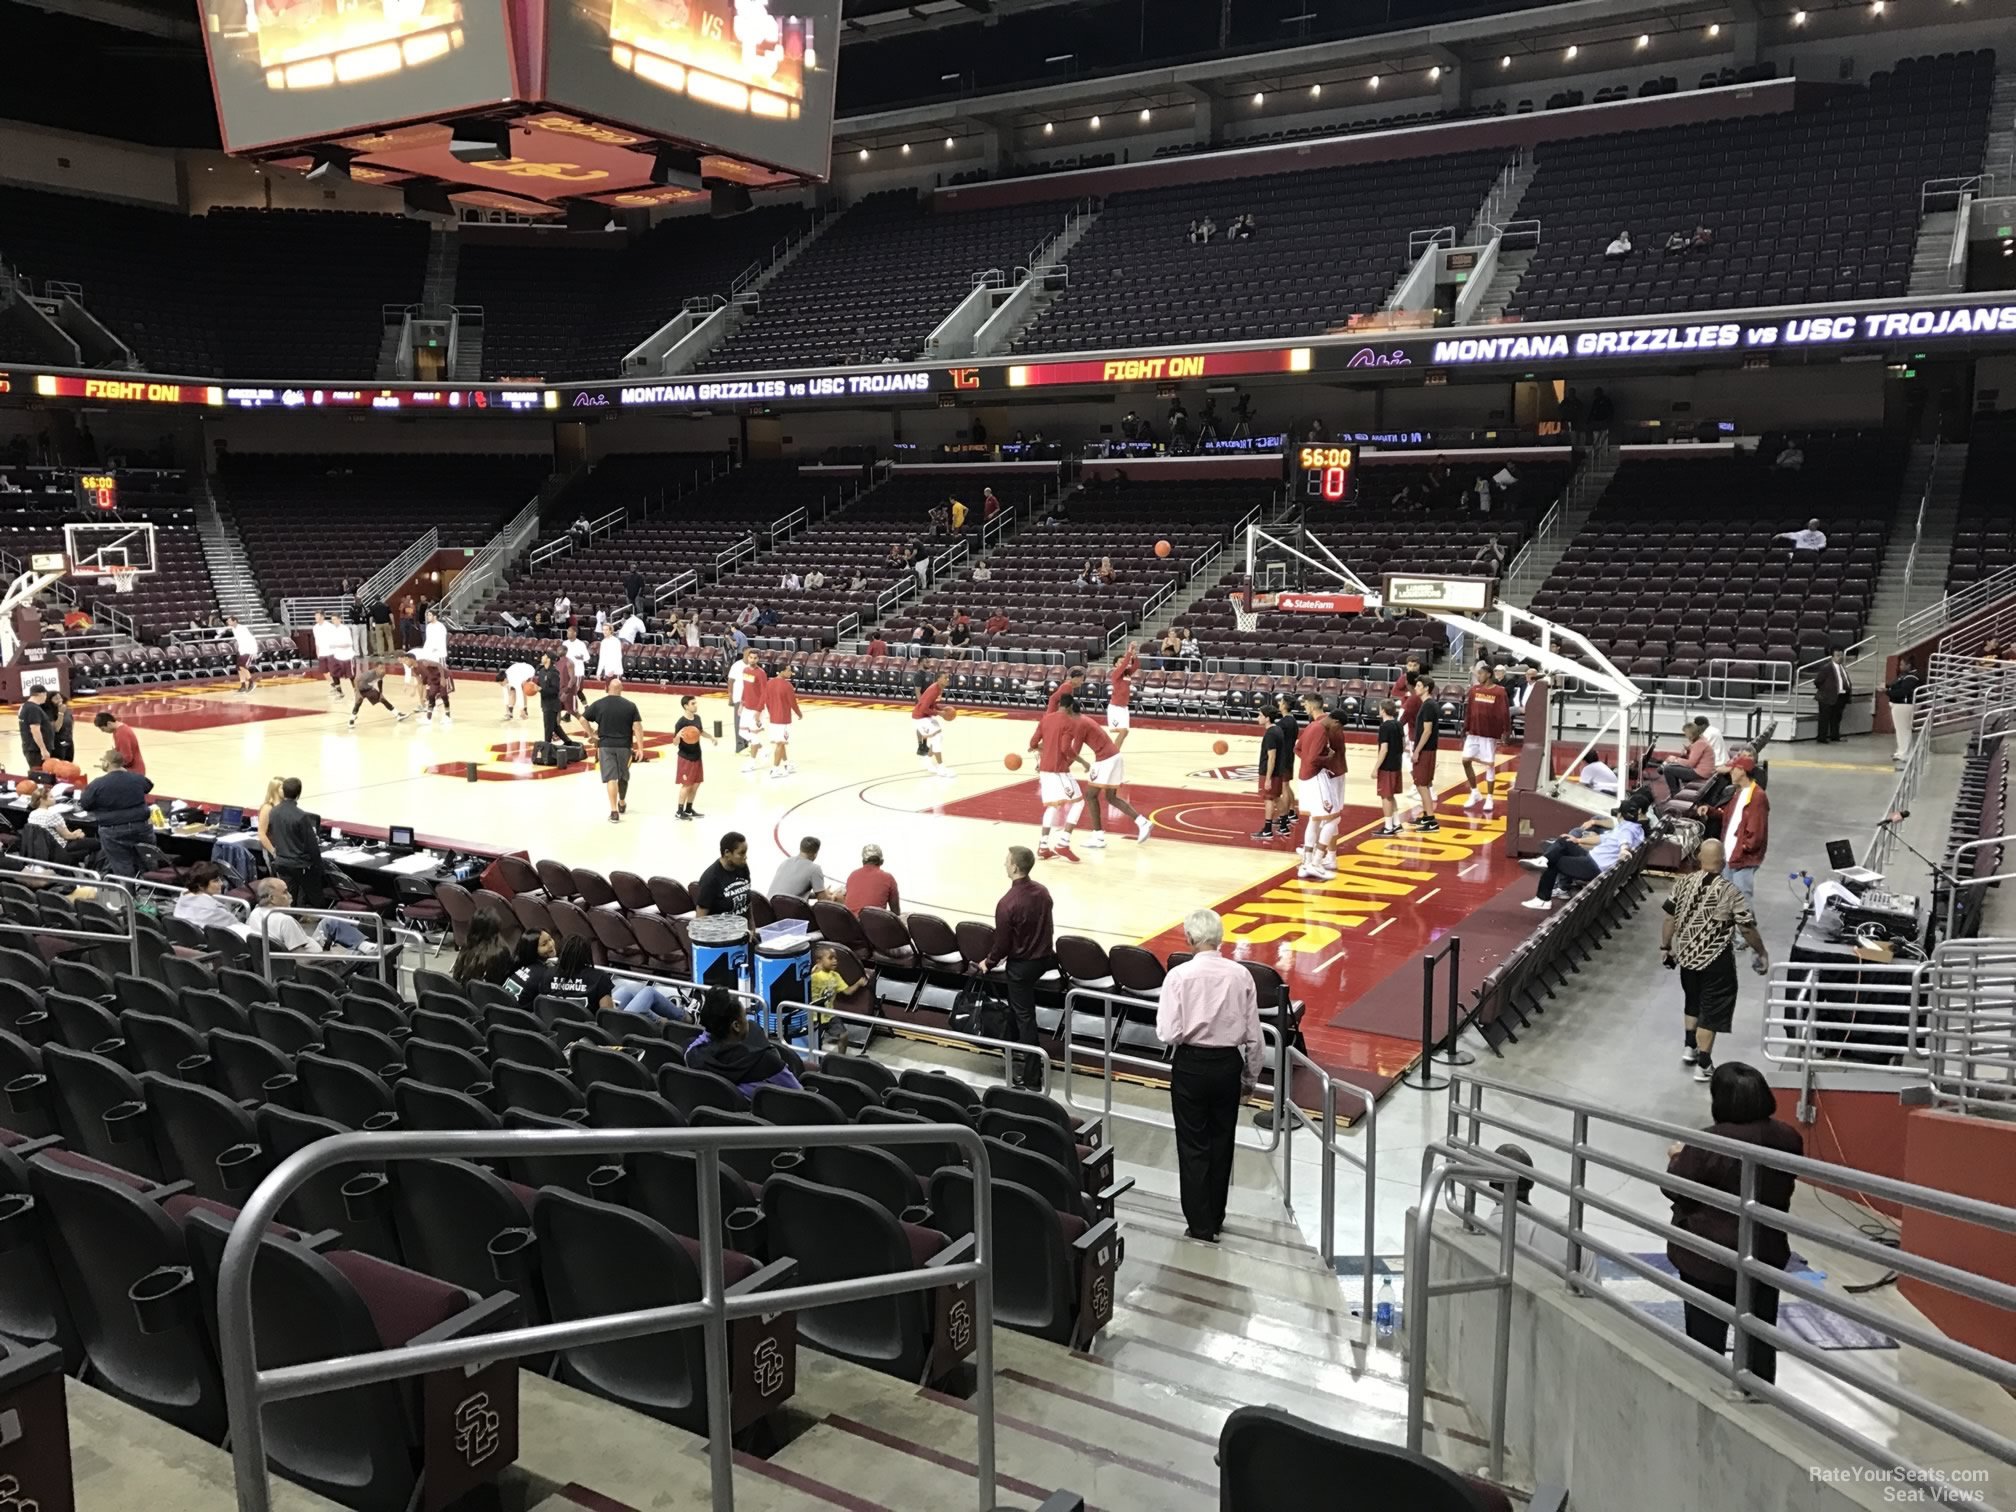 section 119, row 10 seat view  - galen center